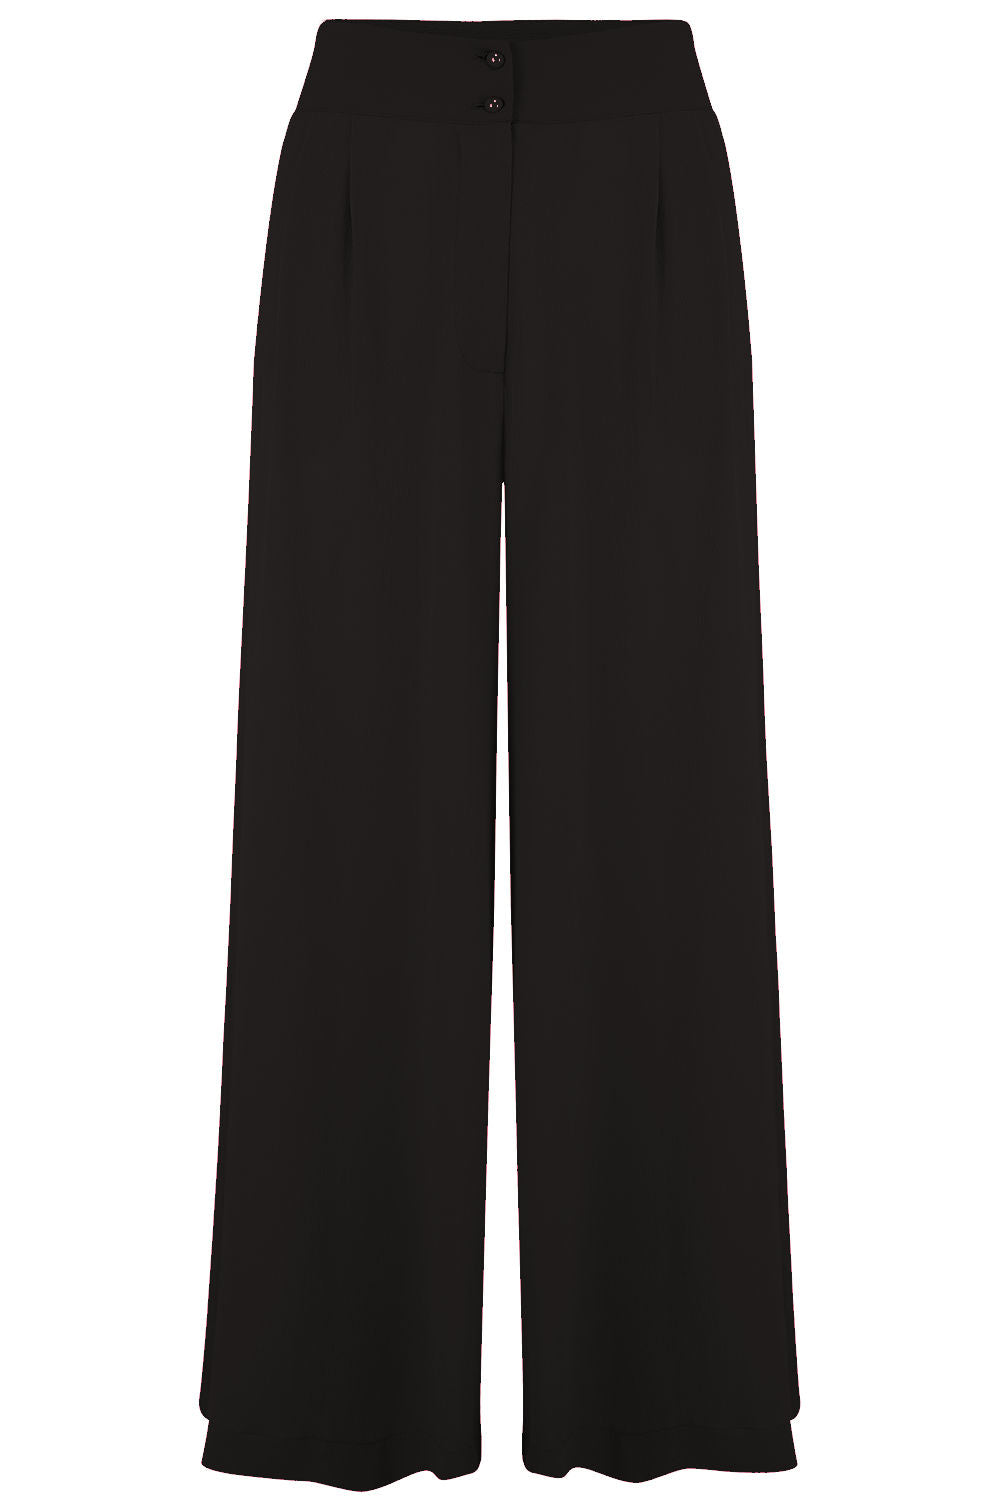 Vintage Wide Leg Pants & Beach Pajamas History The Sophia Palazzo Wide Leg Trousers in Black Easy To Wear Vintage Inspired Style £39.95 AT vintagedancer.com